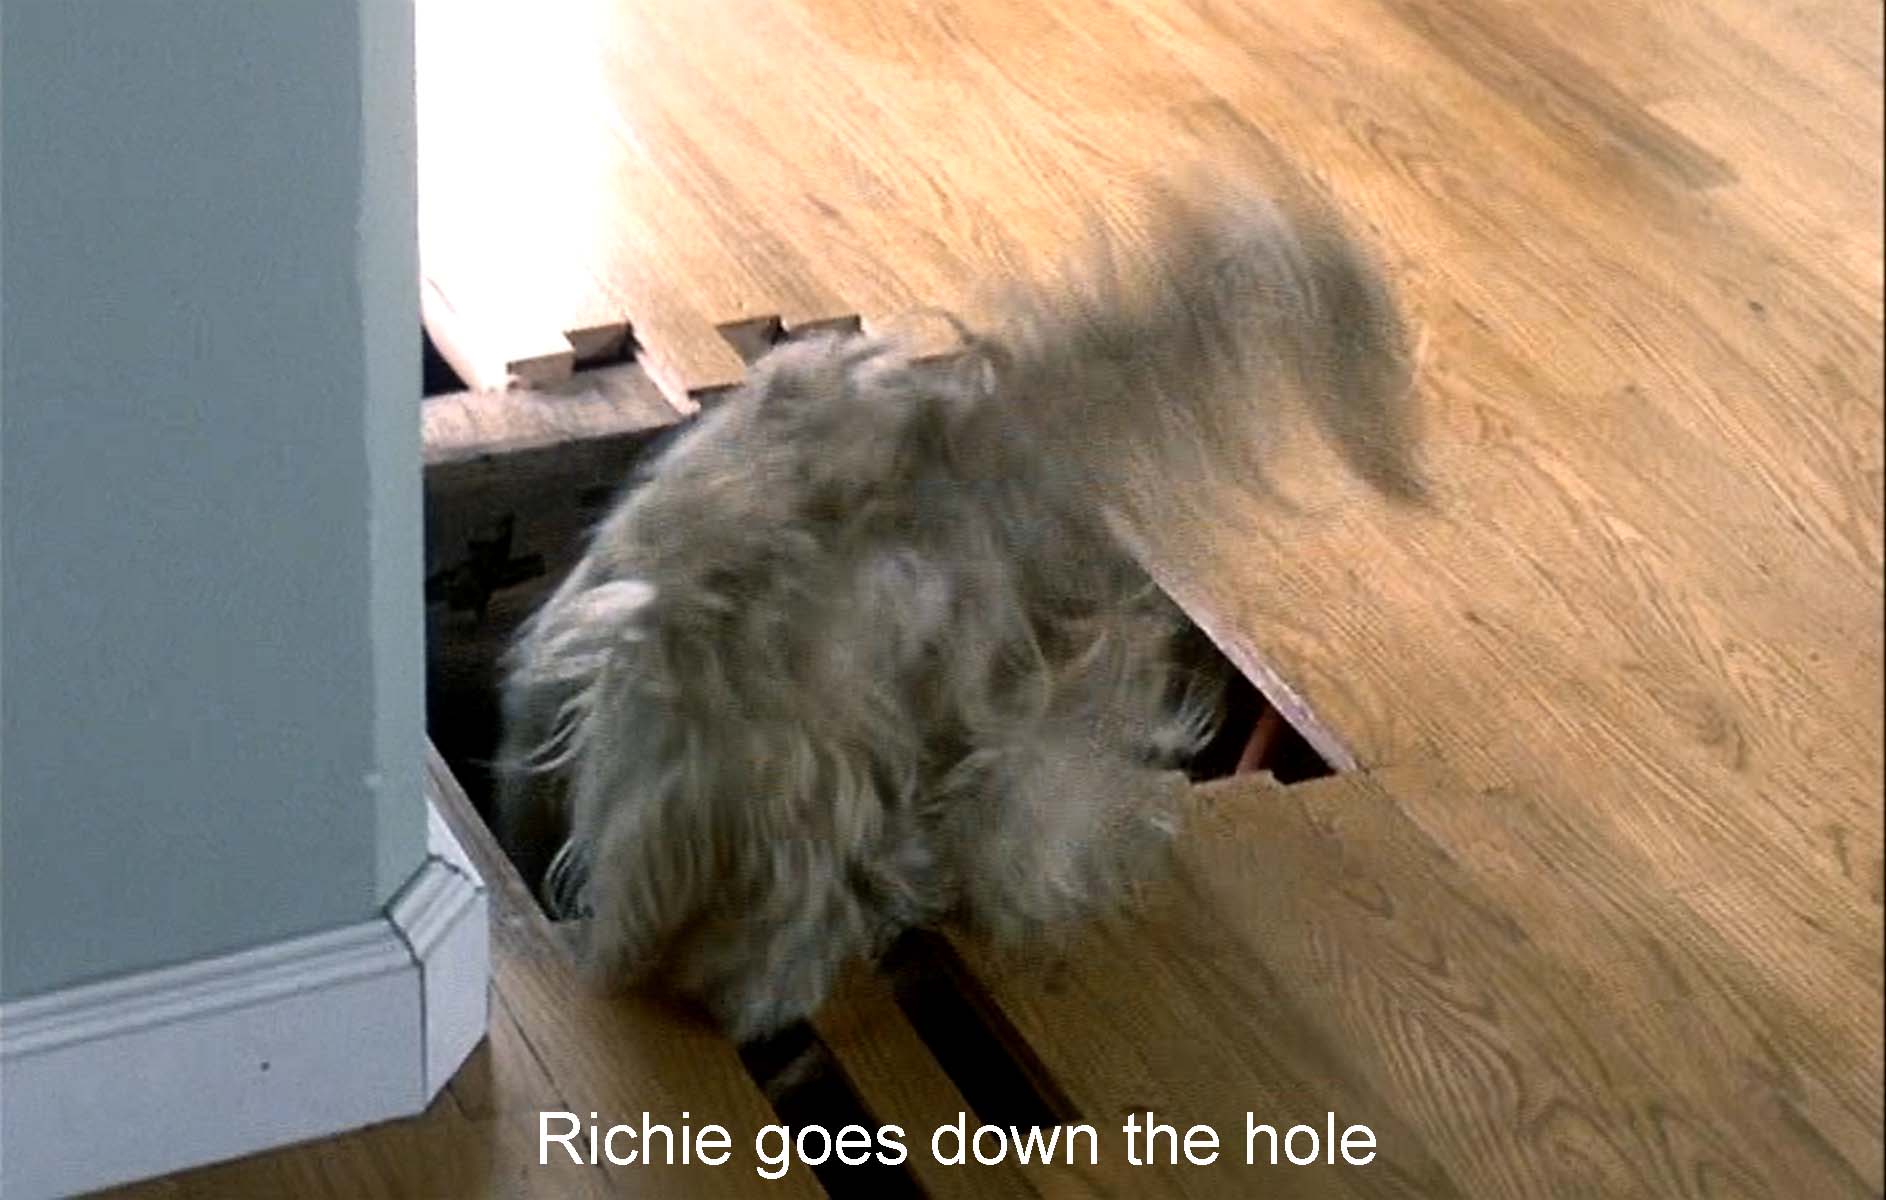 Richie goes down the hole